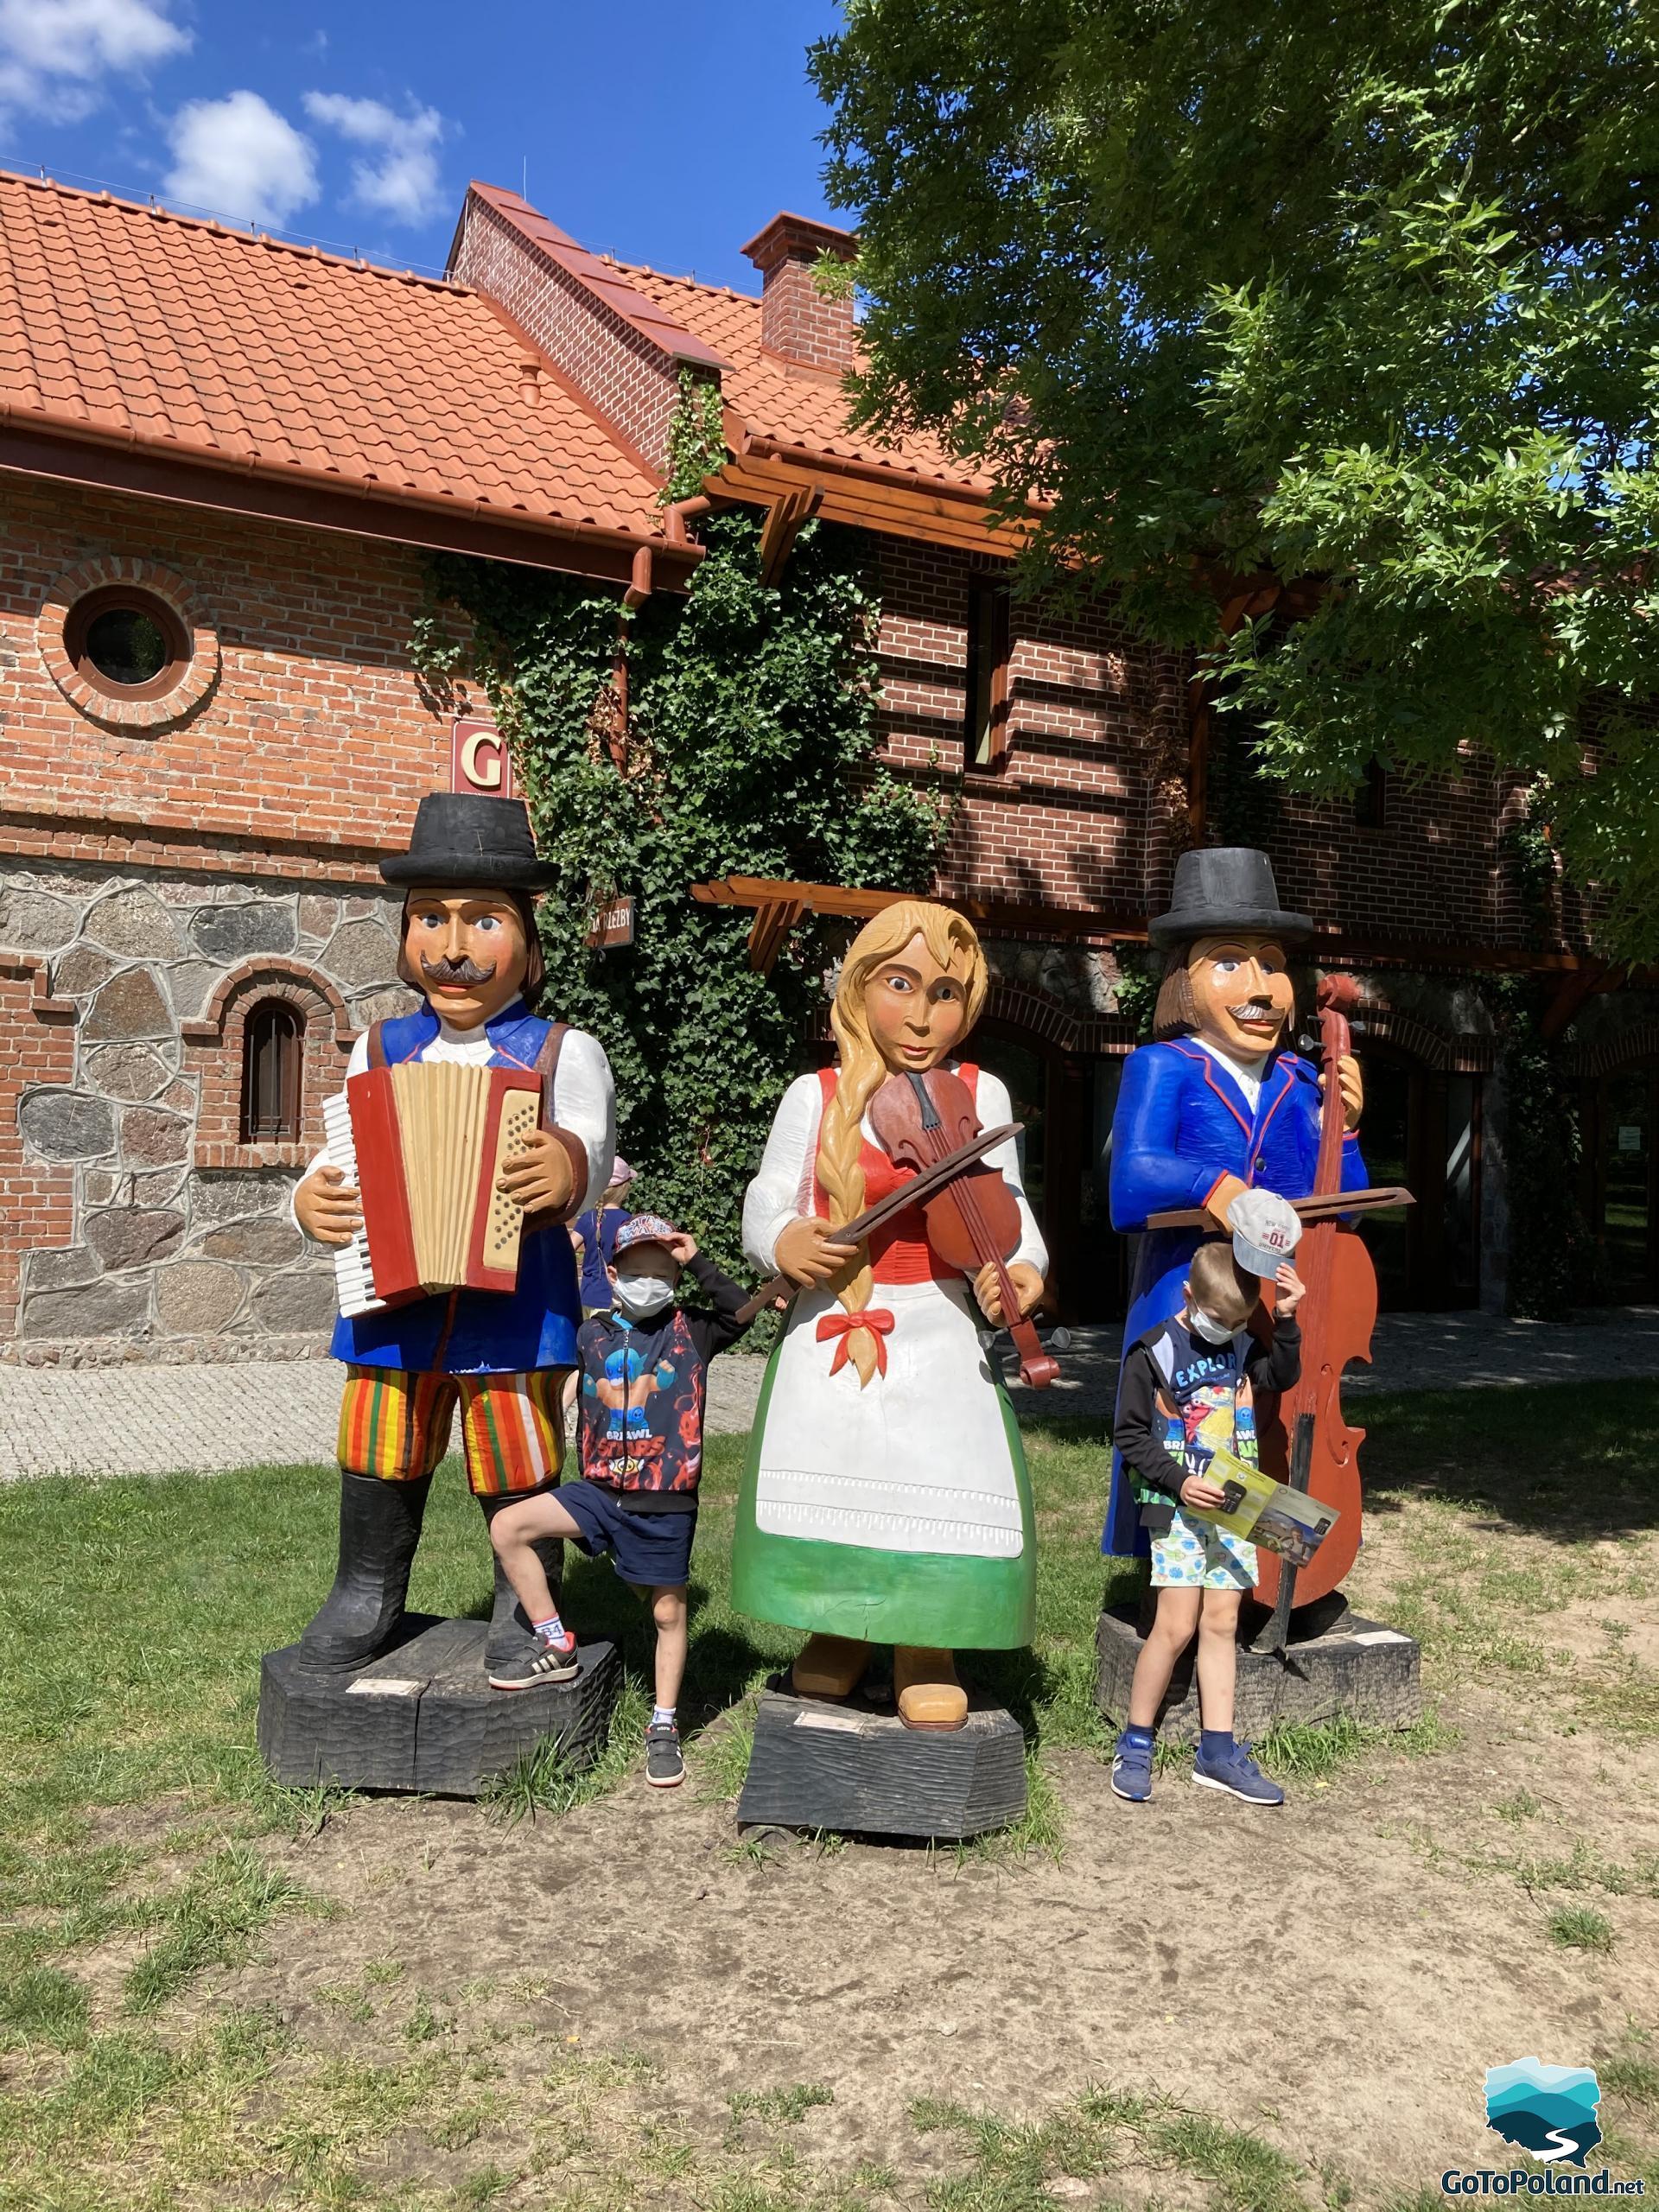 two kids are standing by wooden, colorful sculptures presenting folk figures in folk costumes